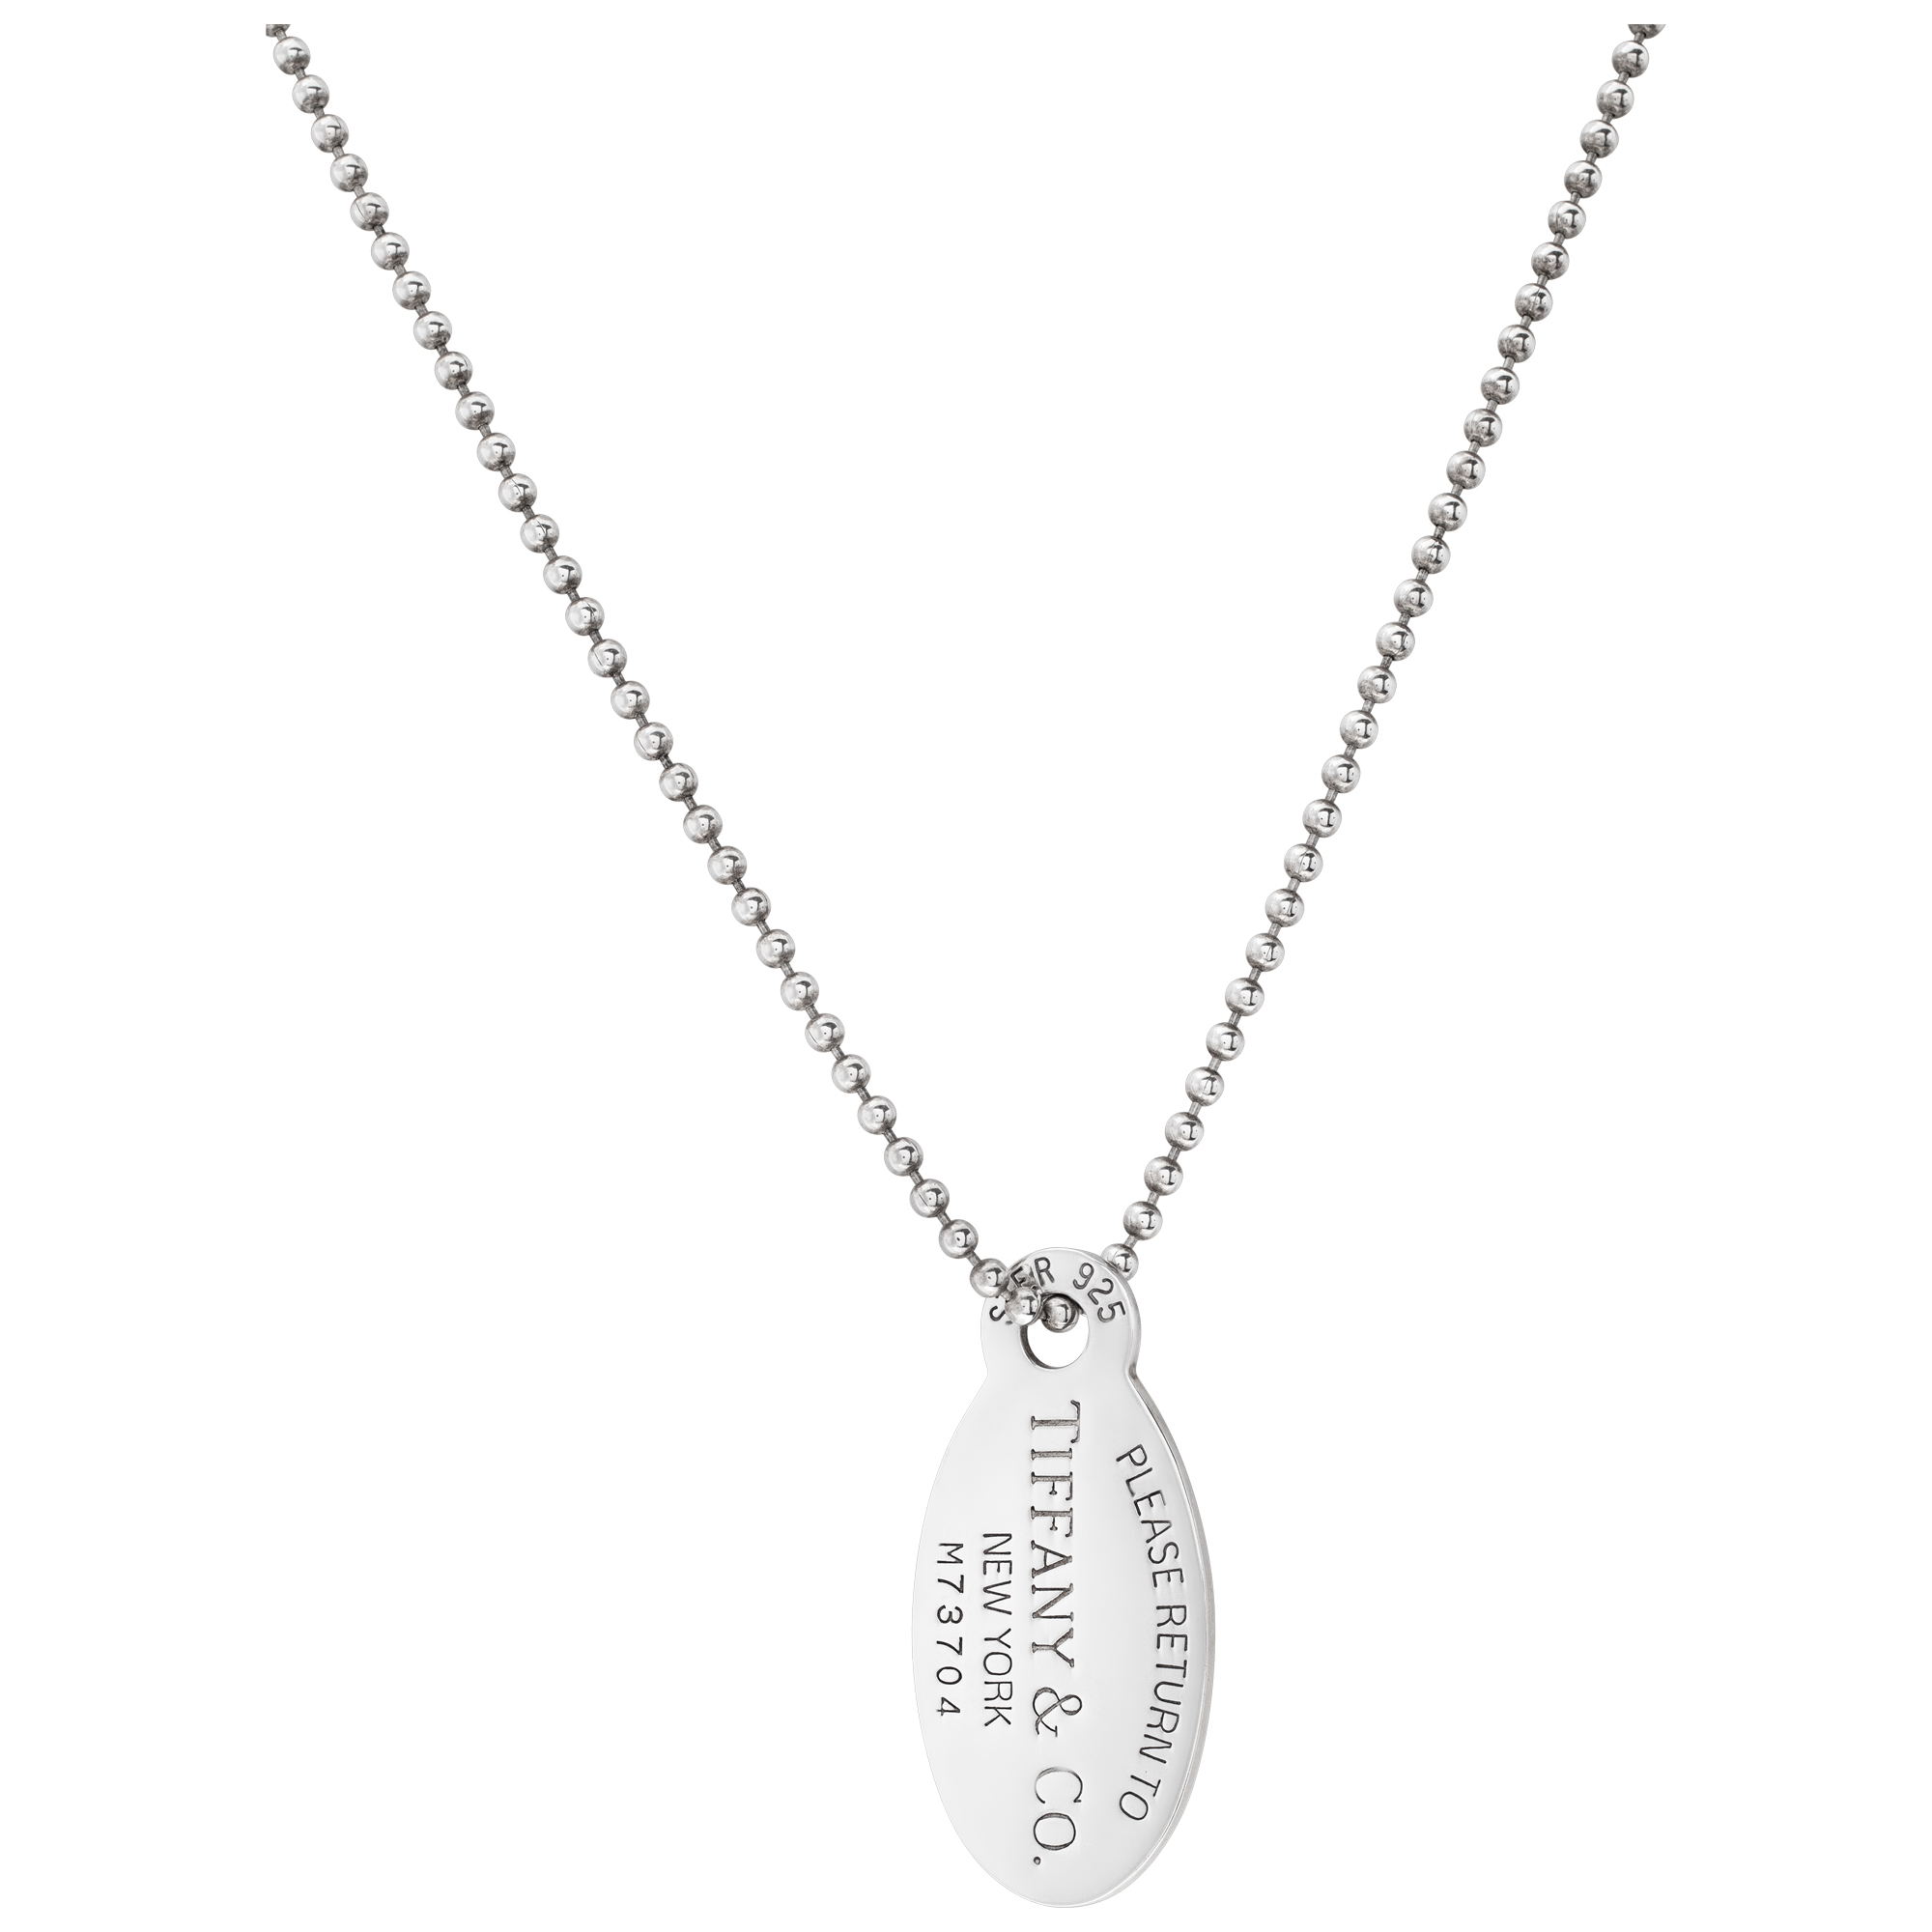 Tiffany & Co. sterling silver "Return To Tiffany" chain and pendant image 1